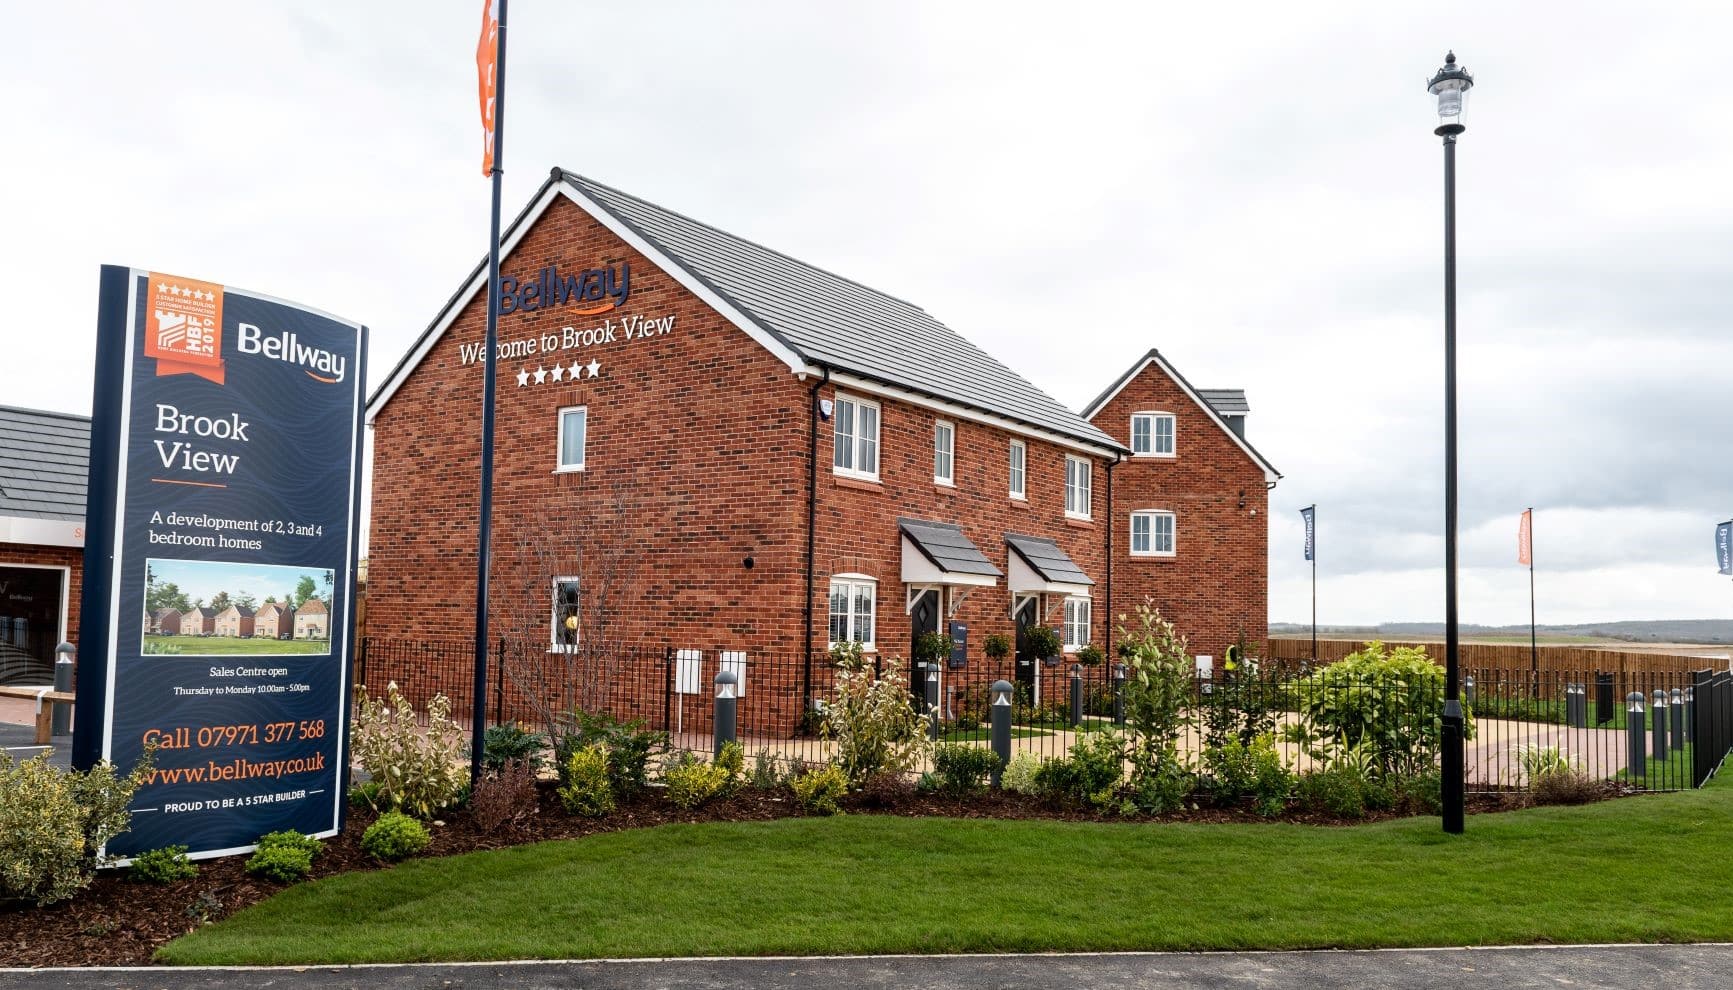 Final homes for sale at Wixams development